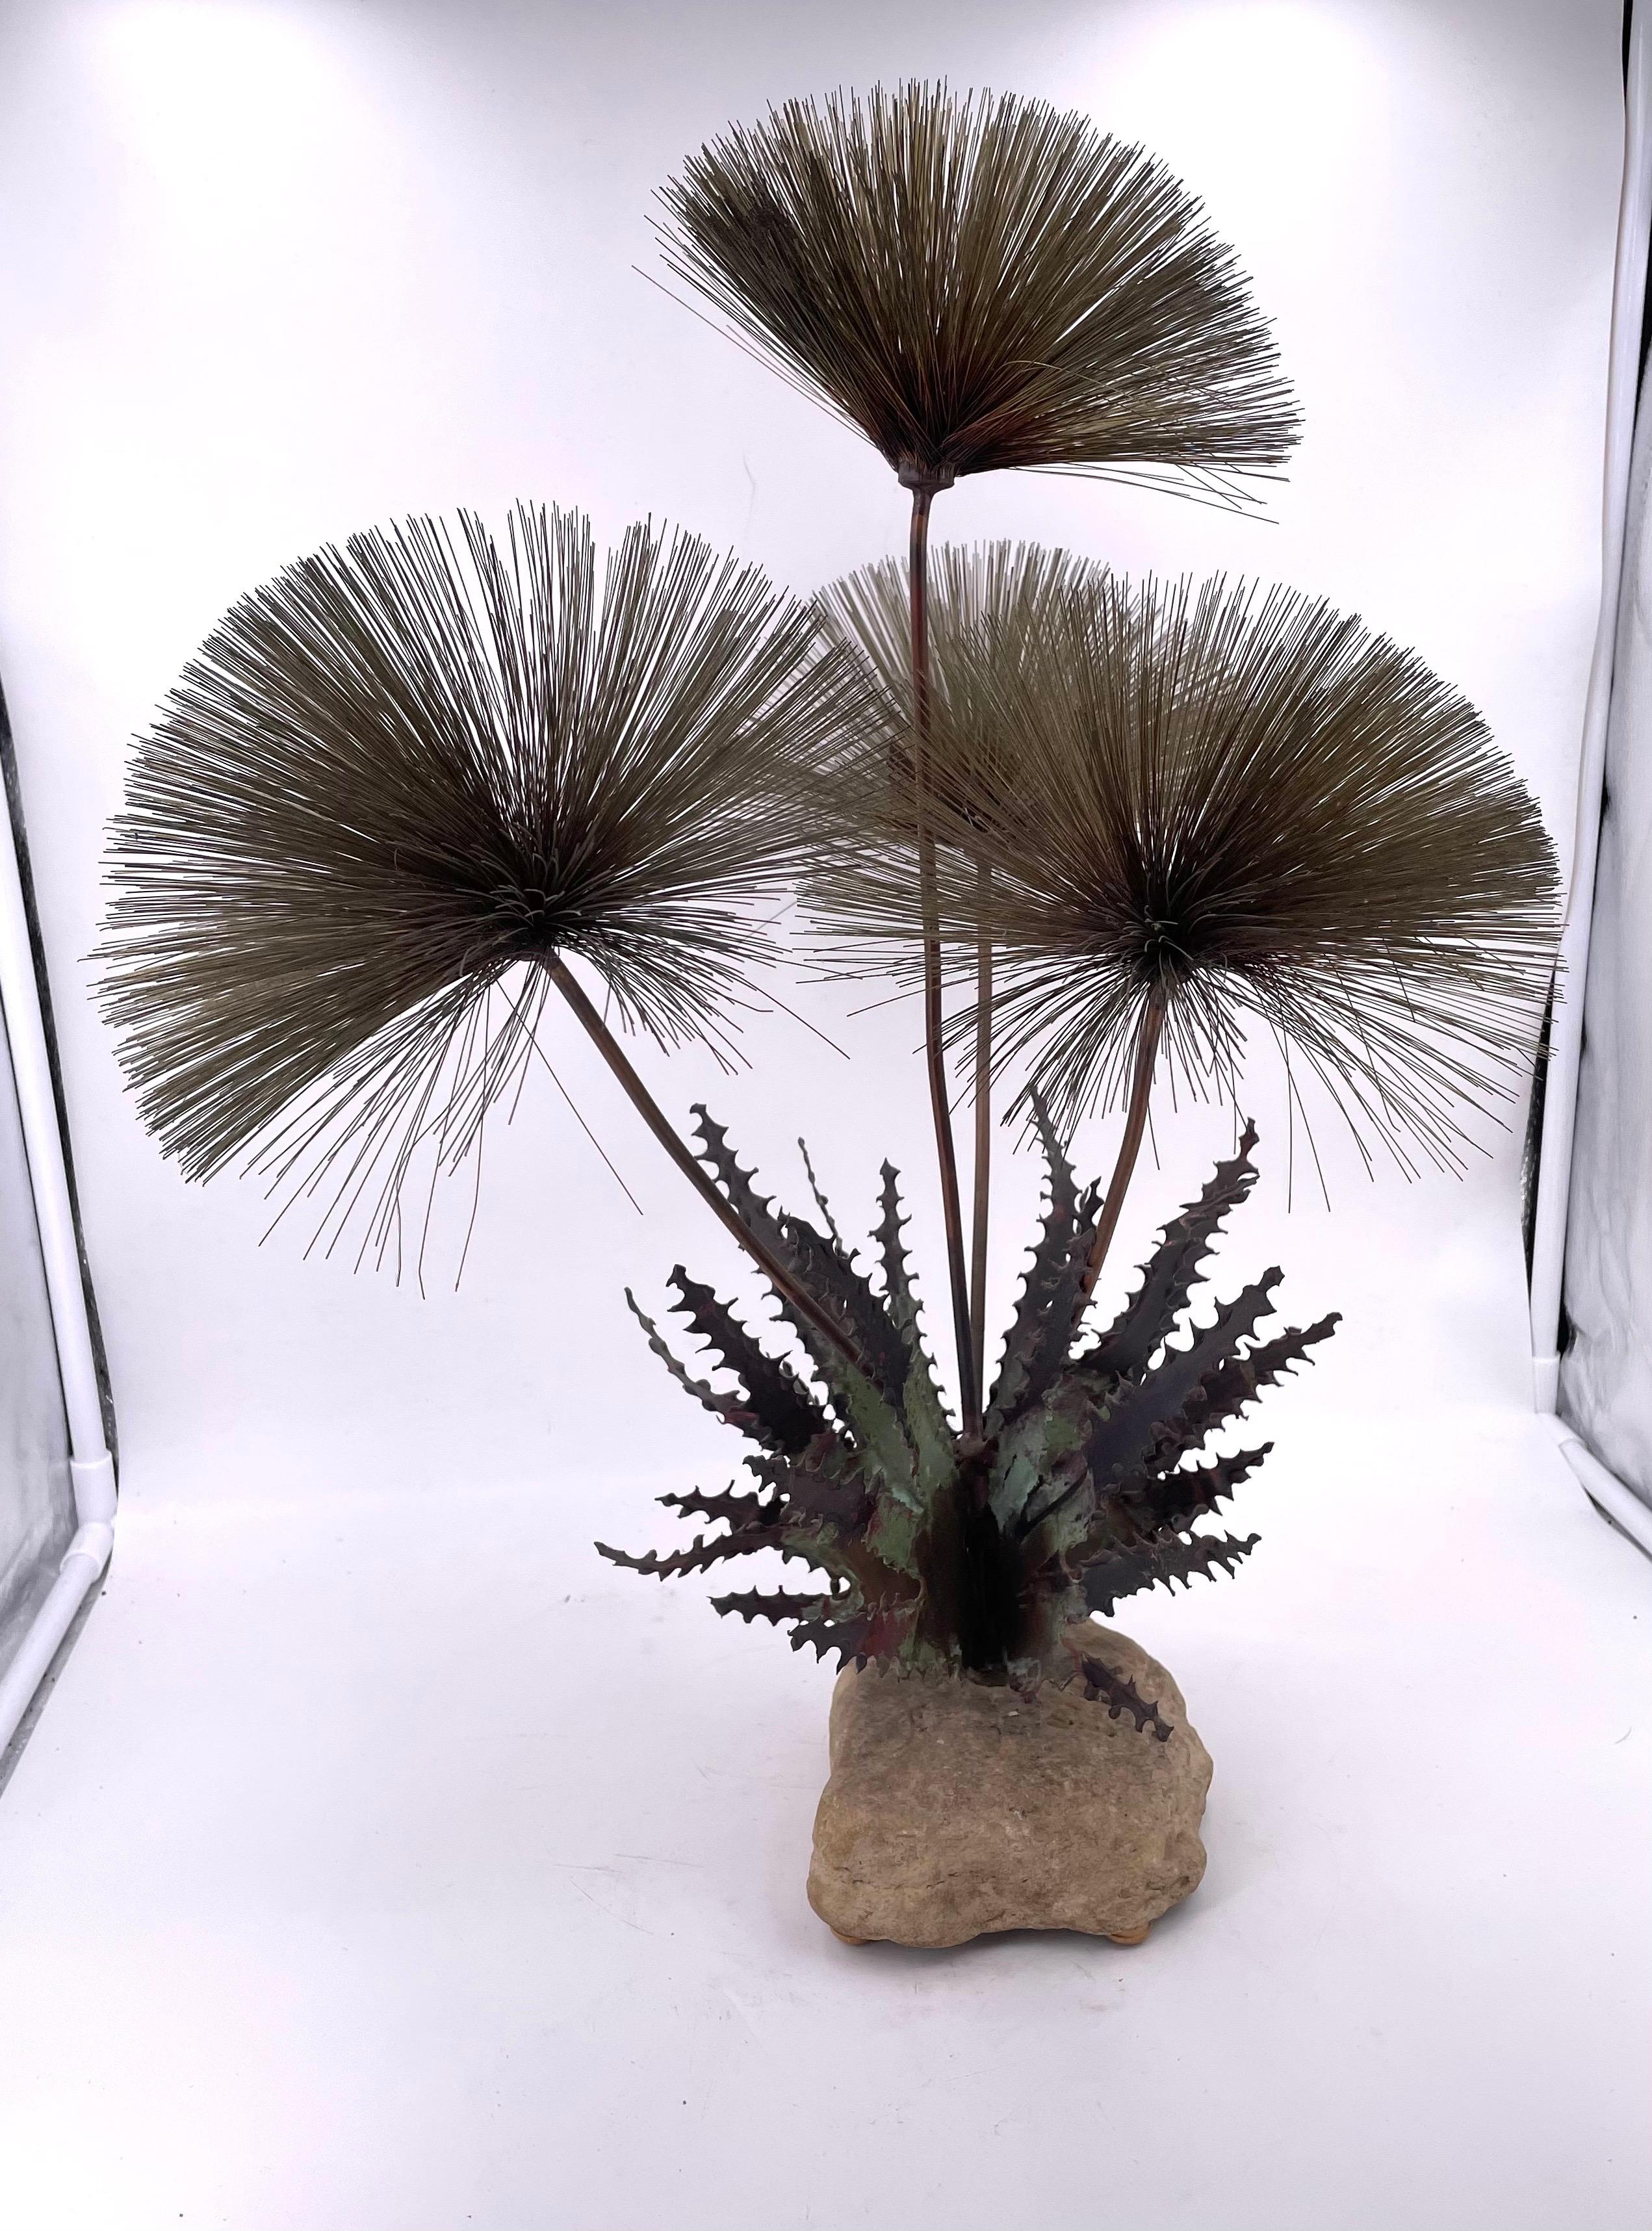 Signed sculpture of copper and stone by John Steck.
Looks like dandelions! A riff on the French tole plant sculptures...
Also called 